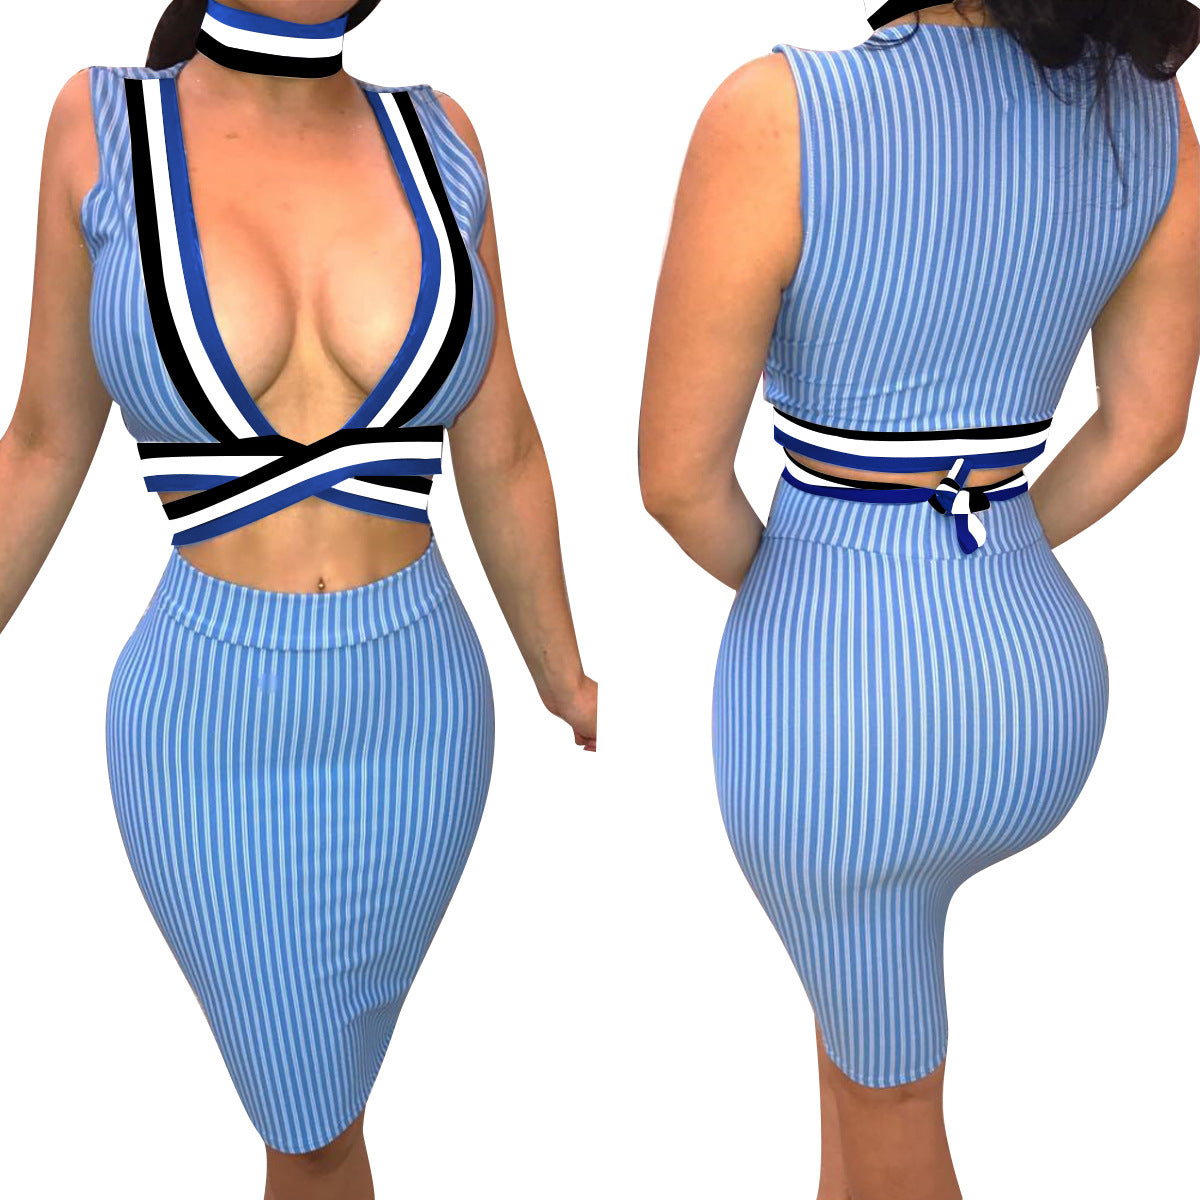 Striped Deep V-neck Crop Top with Short Skirt Two Pieces Dress Set